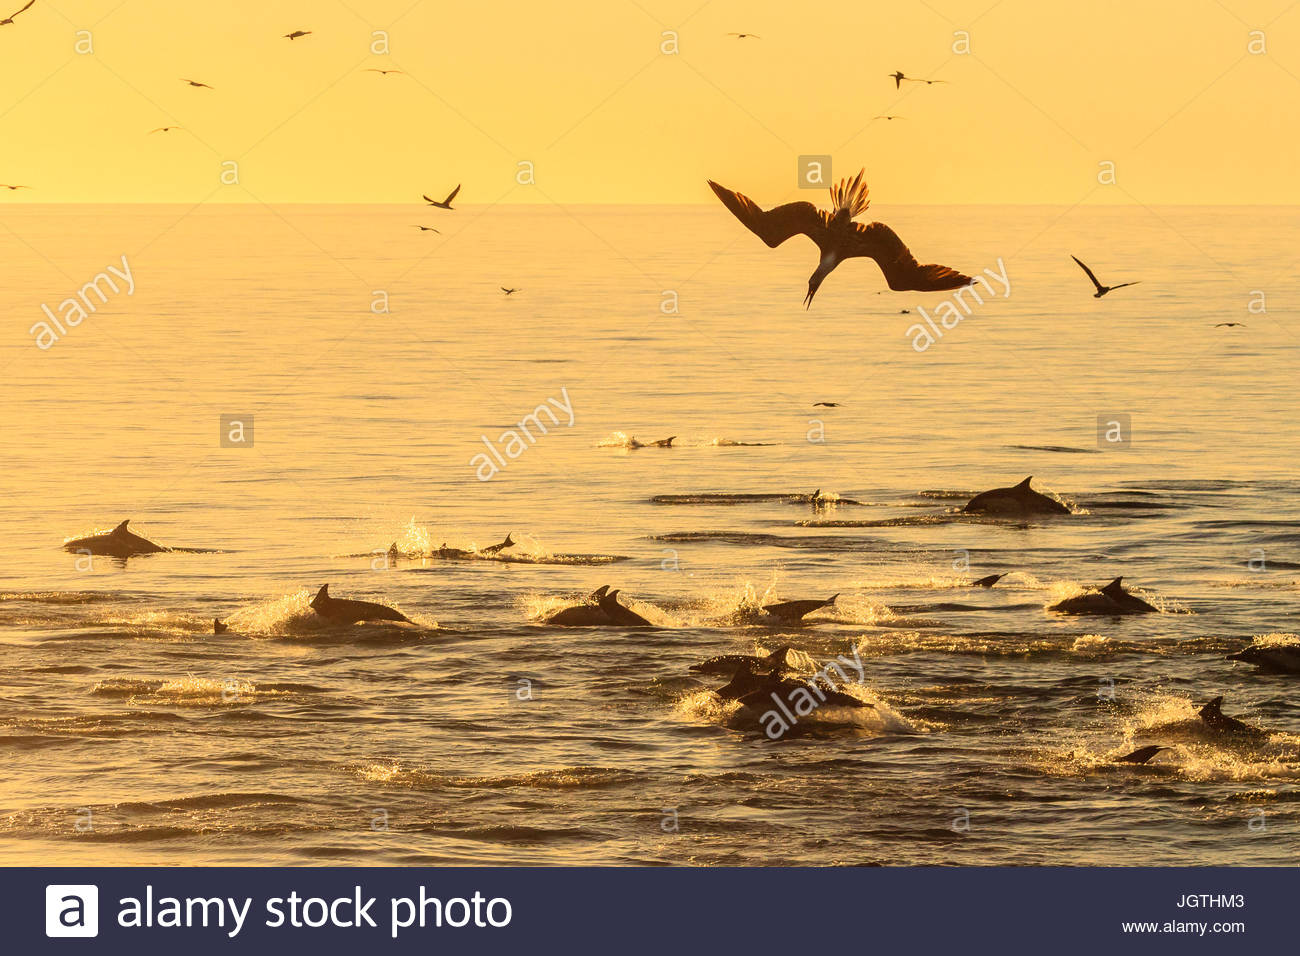 Long-beaked common dolphins, Delphinus capensis, and sea birds in a feeding frenzy. Stock Photo